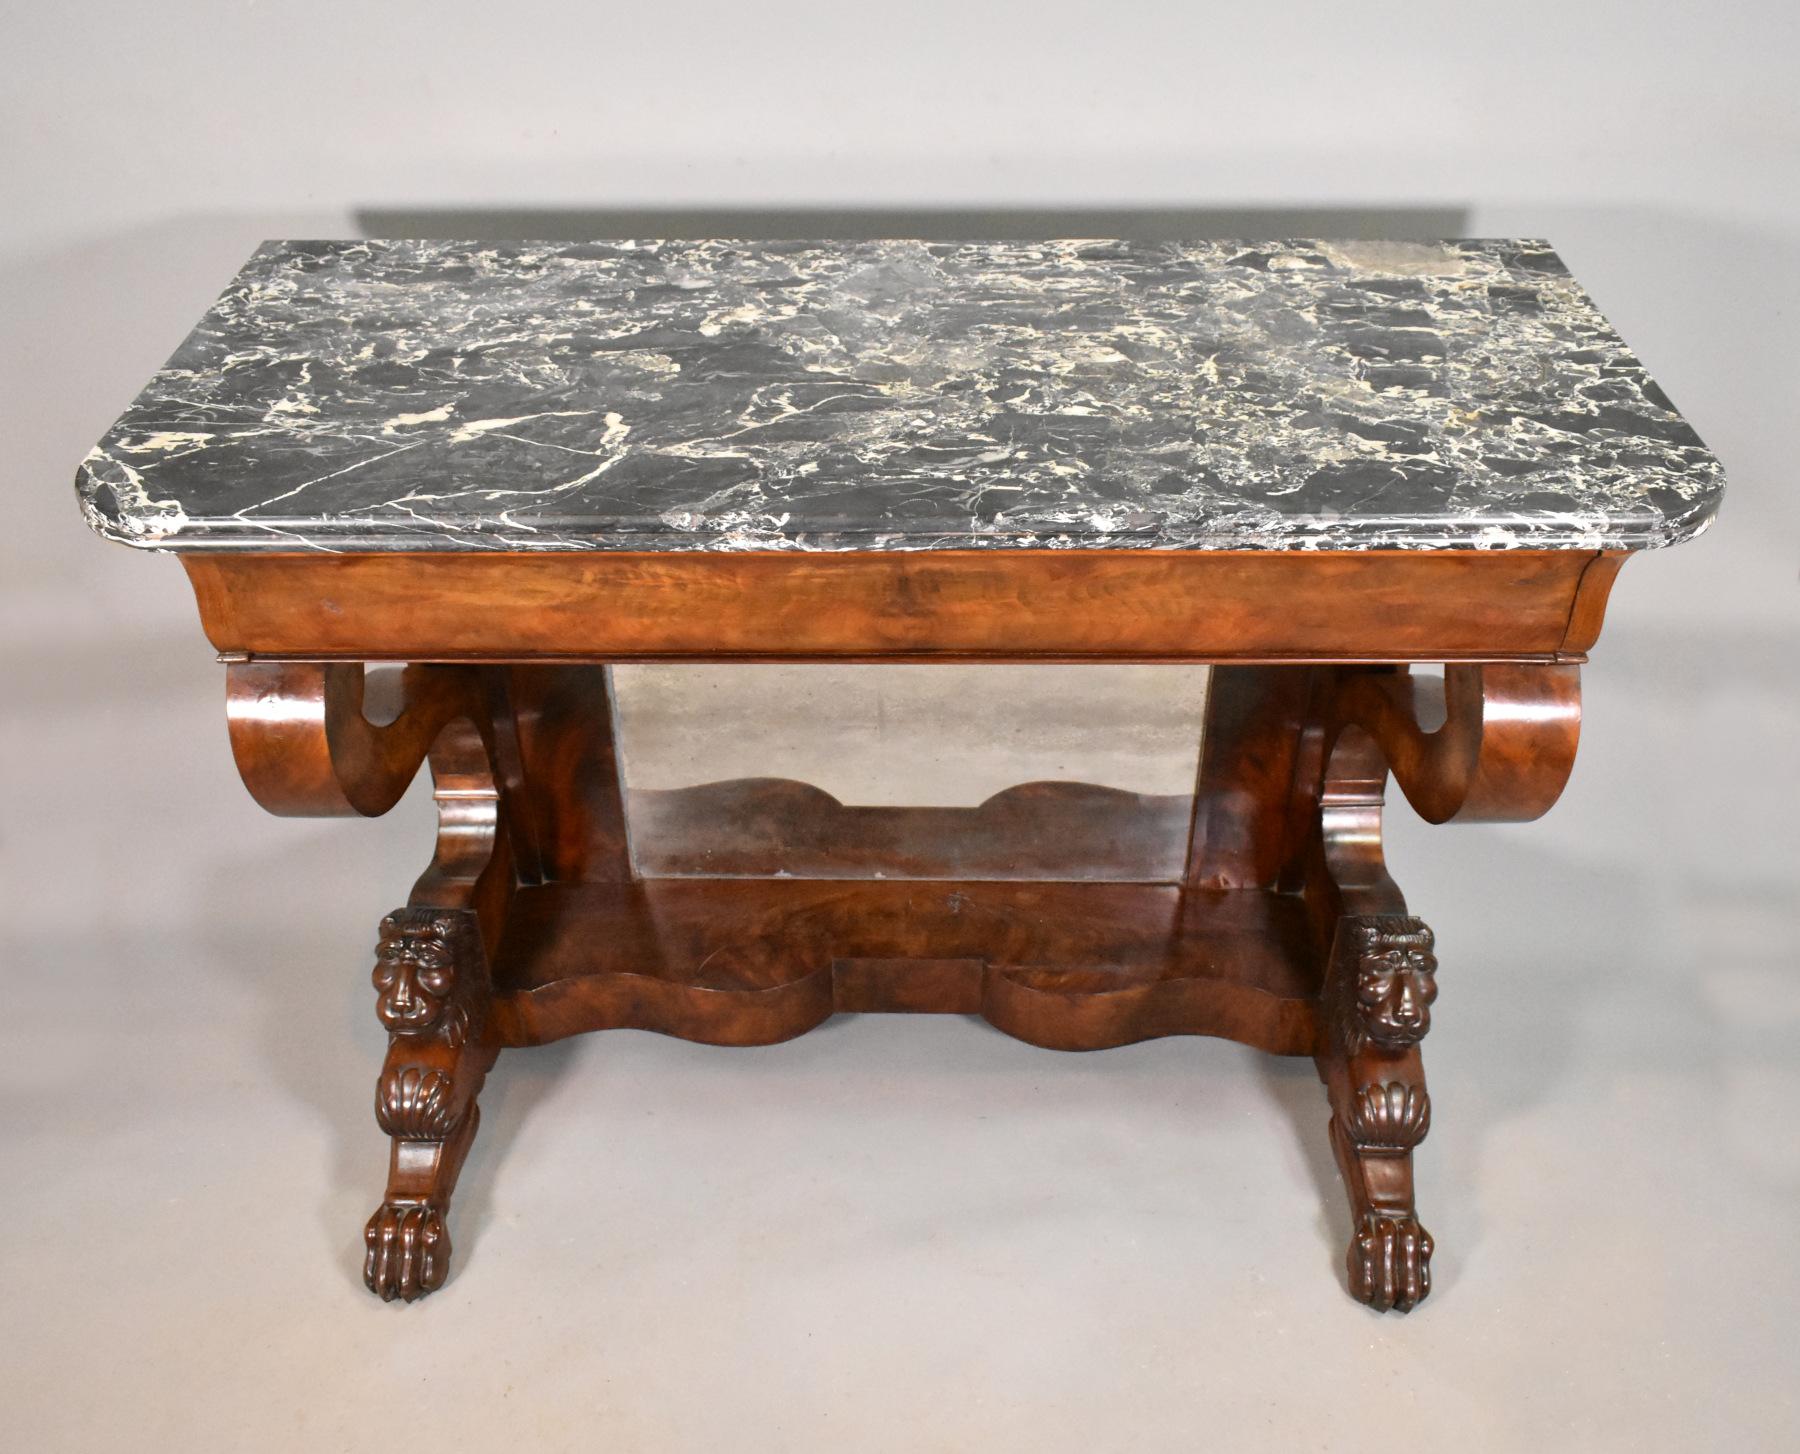 Antique French mahogany console table Louis Philippe.

This impressive console table features a variegated black, white and grey Brèche marble top with a moulded outer edge. 

Below this is full-width drawer concealed within the frieze. The